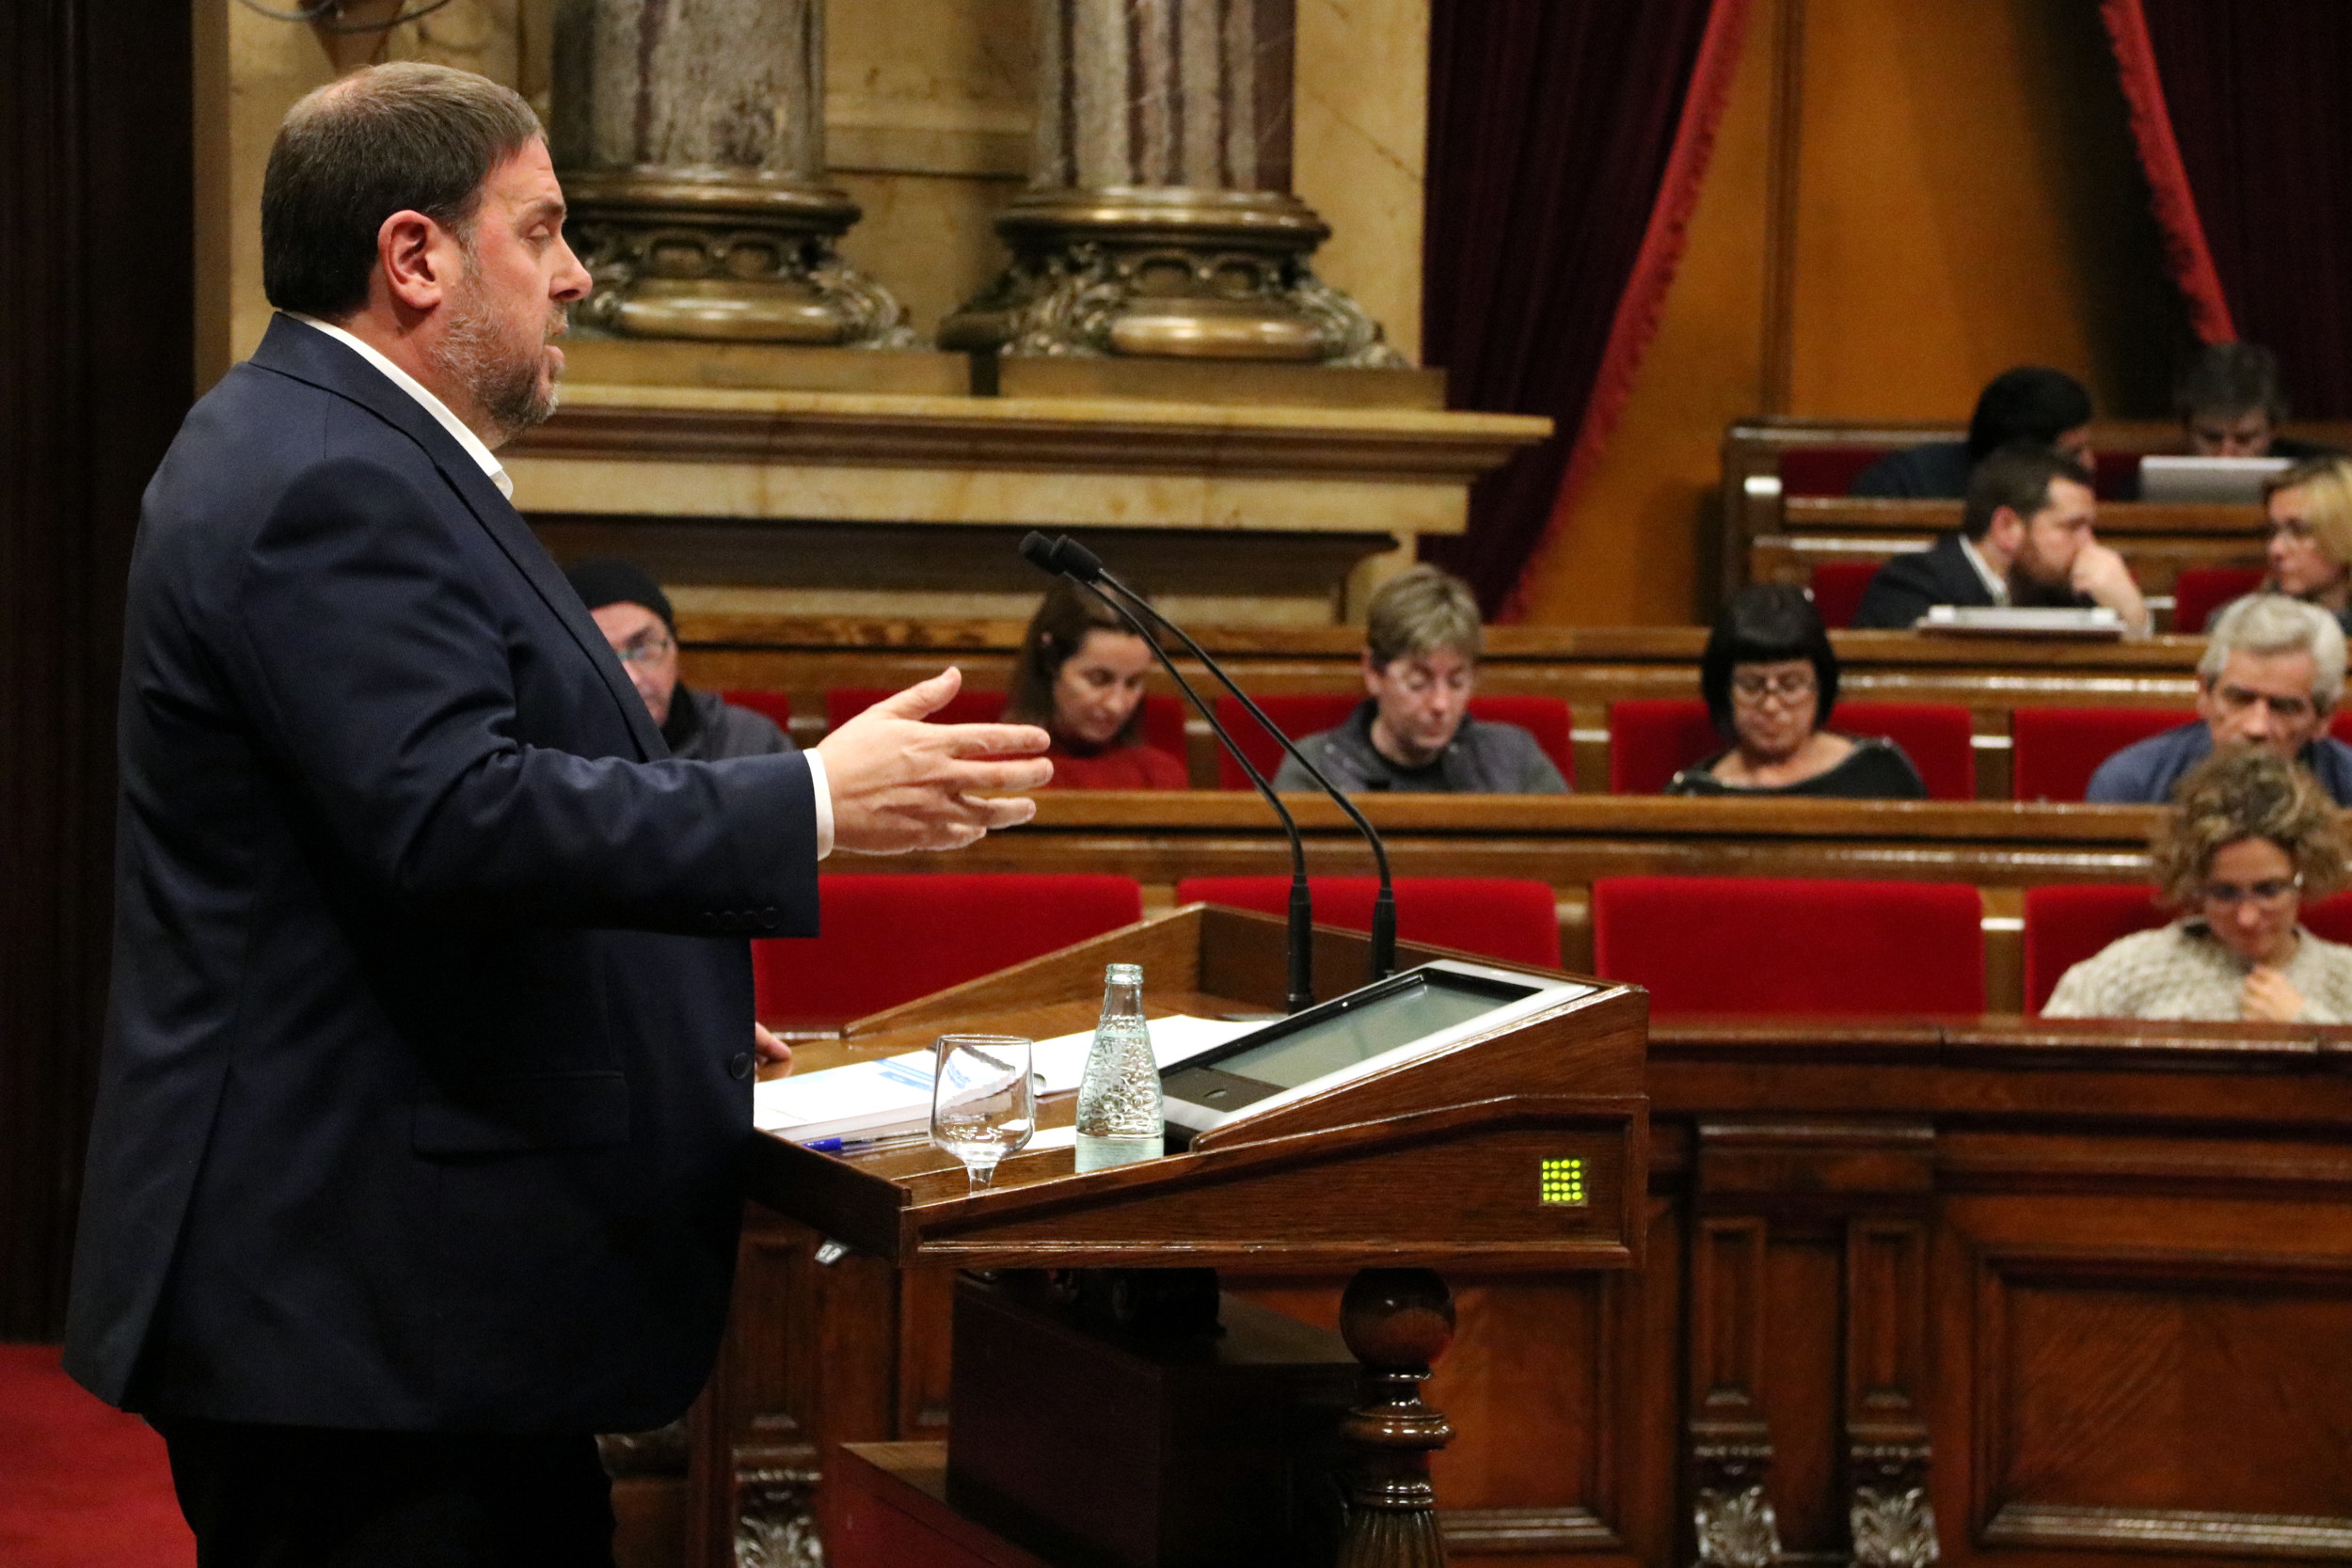 Catalan Vice President and Minister for Economy, Oriol Junqueras, presenting the Budget for 2017 to the Parliament (by ACN)